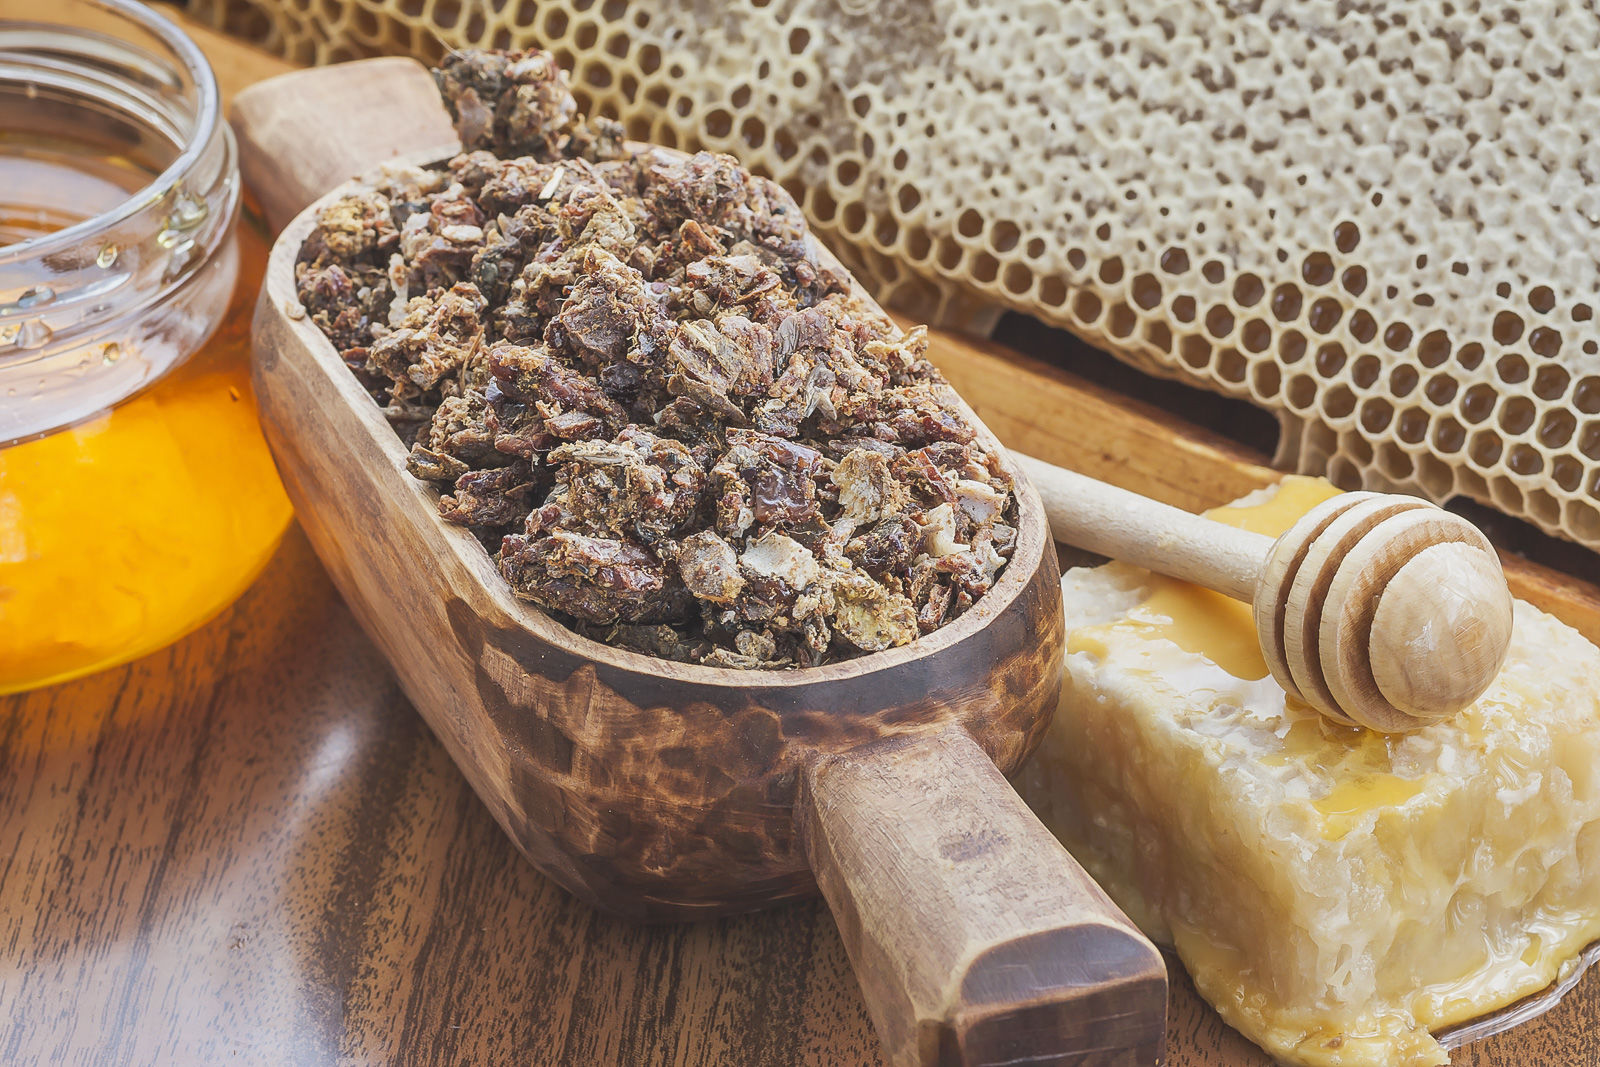 a wooden scoop full of propolis, honeycomb and beeswax